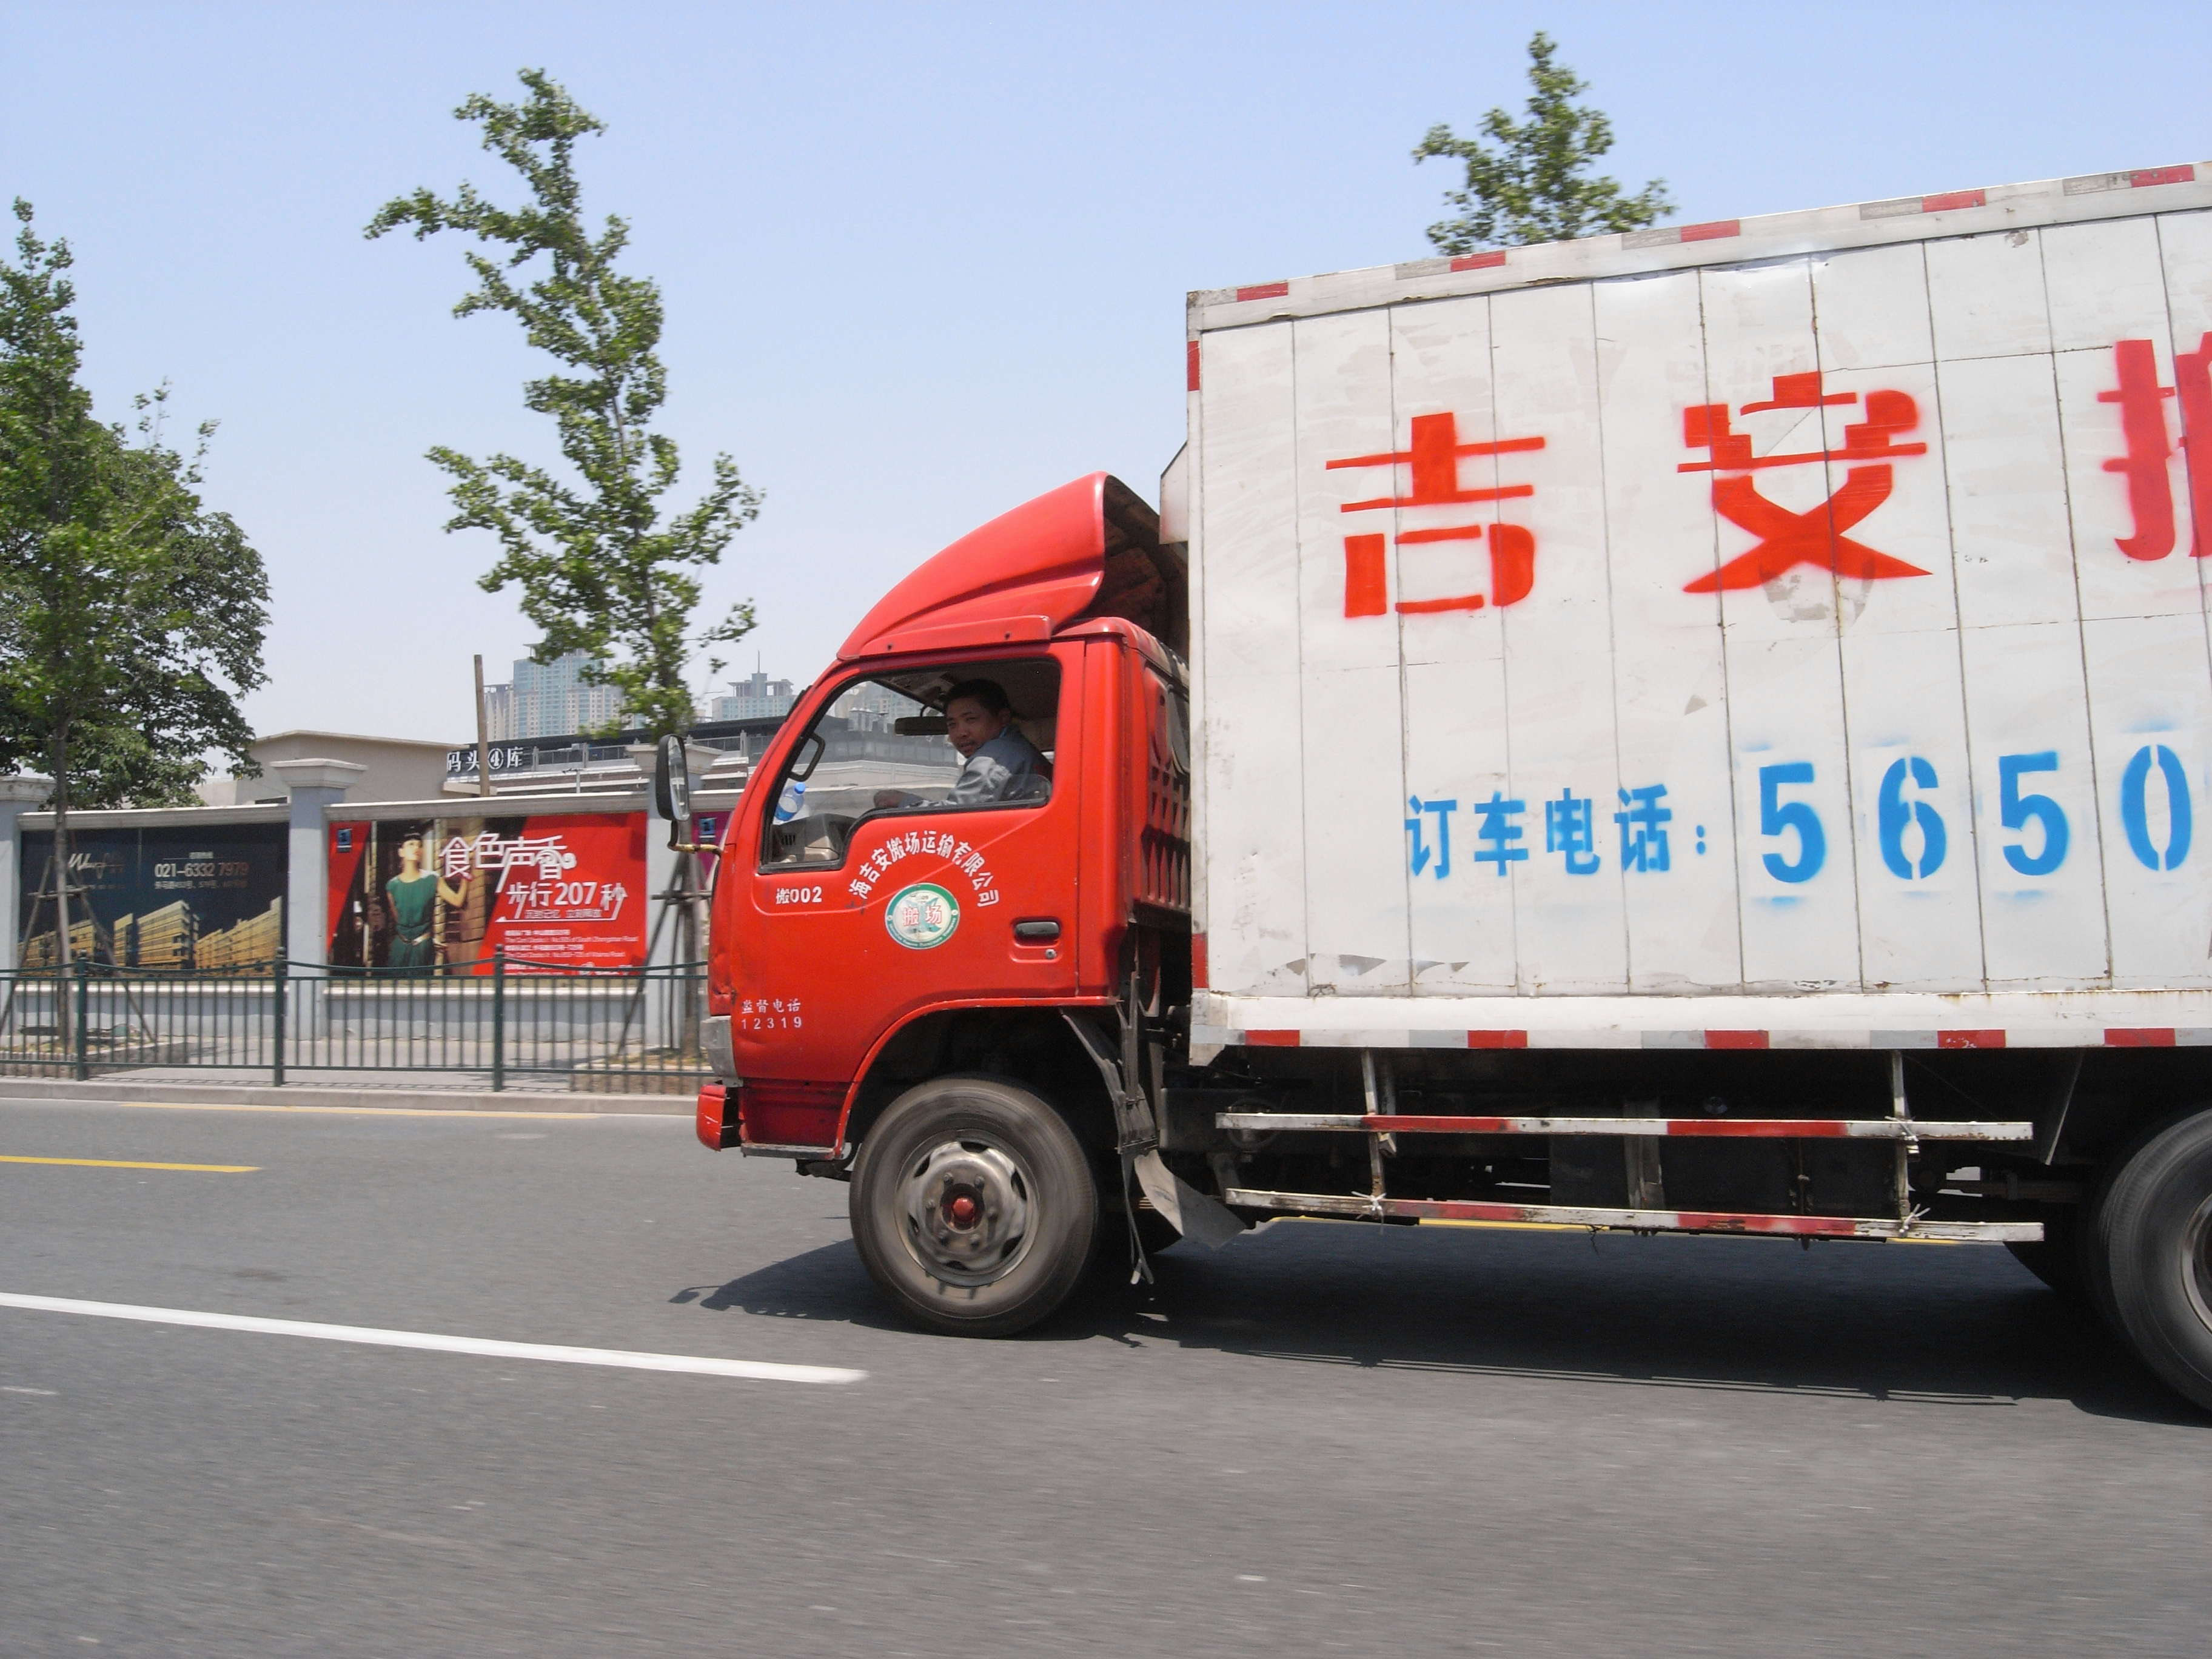 Chinese truckers stranded for days by COVID-19 curbs: ‘I don’t want to drive anymore’